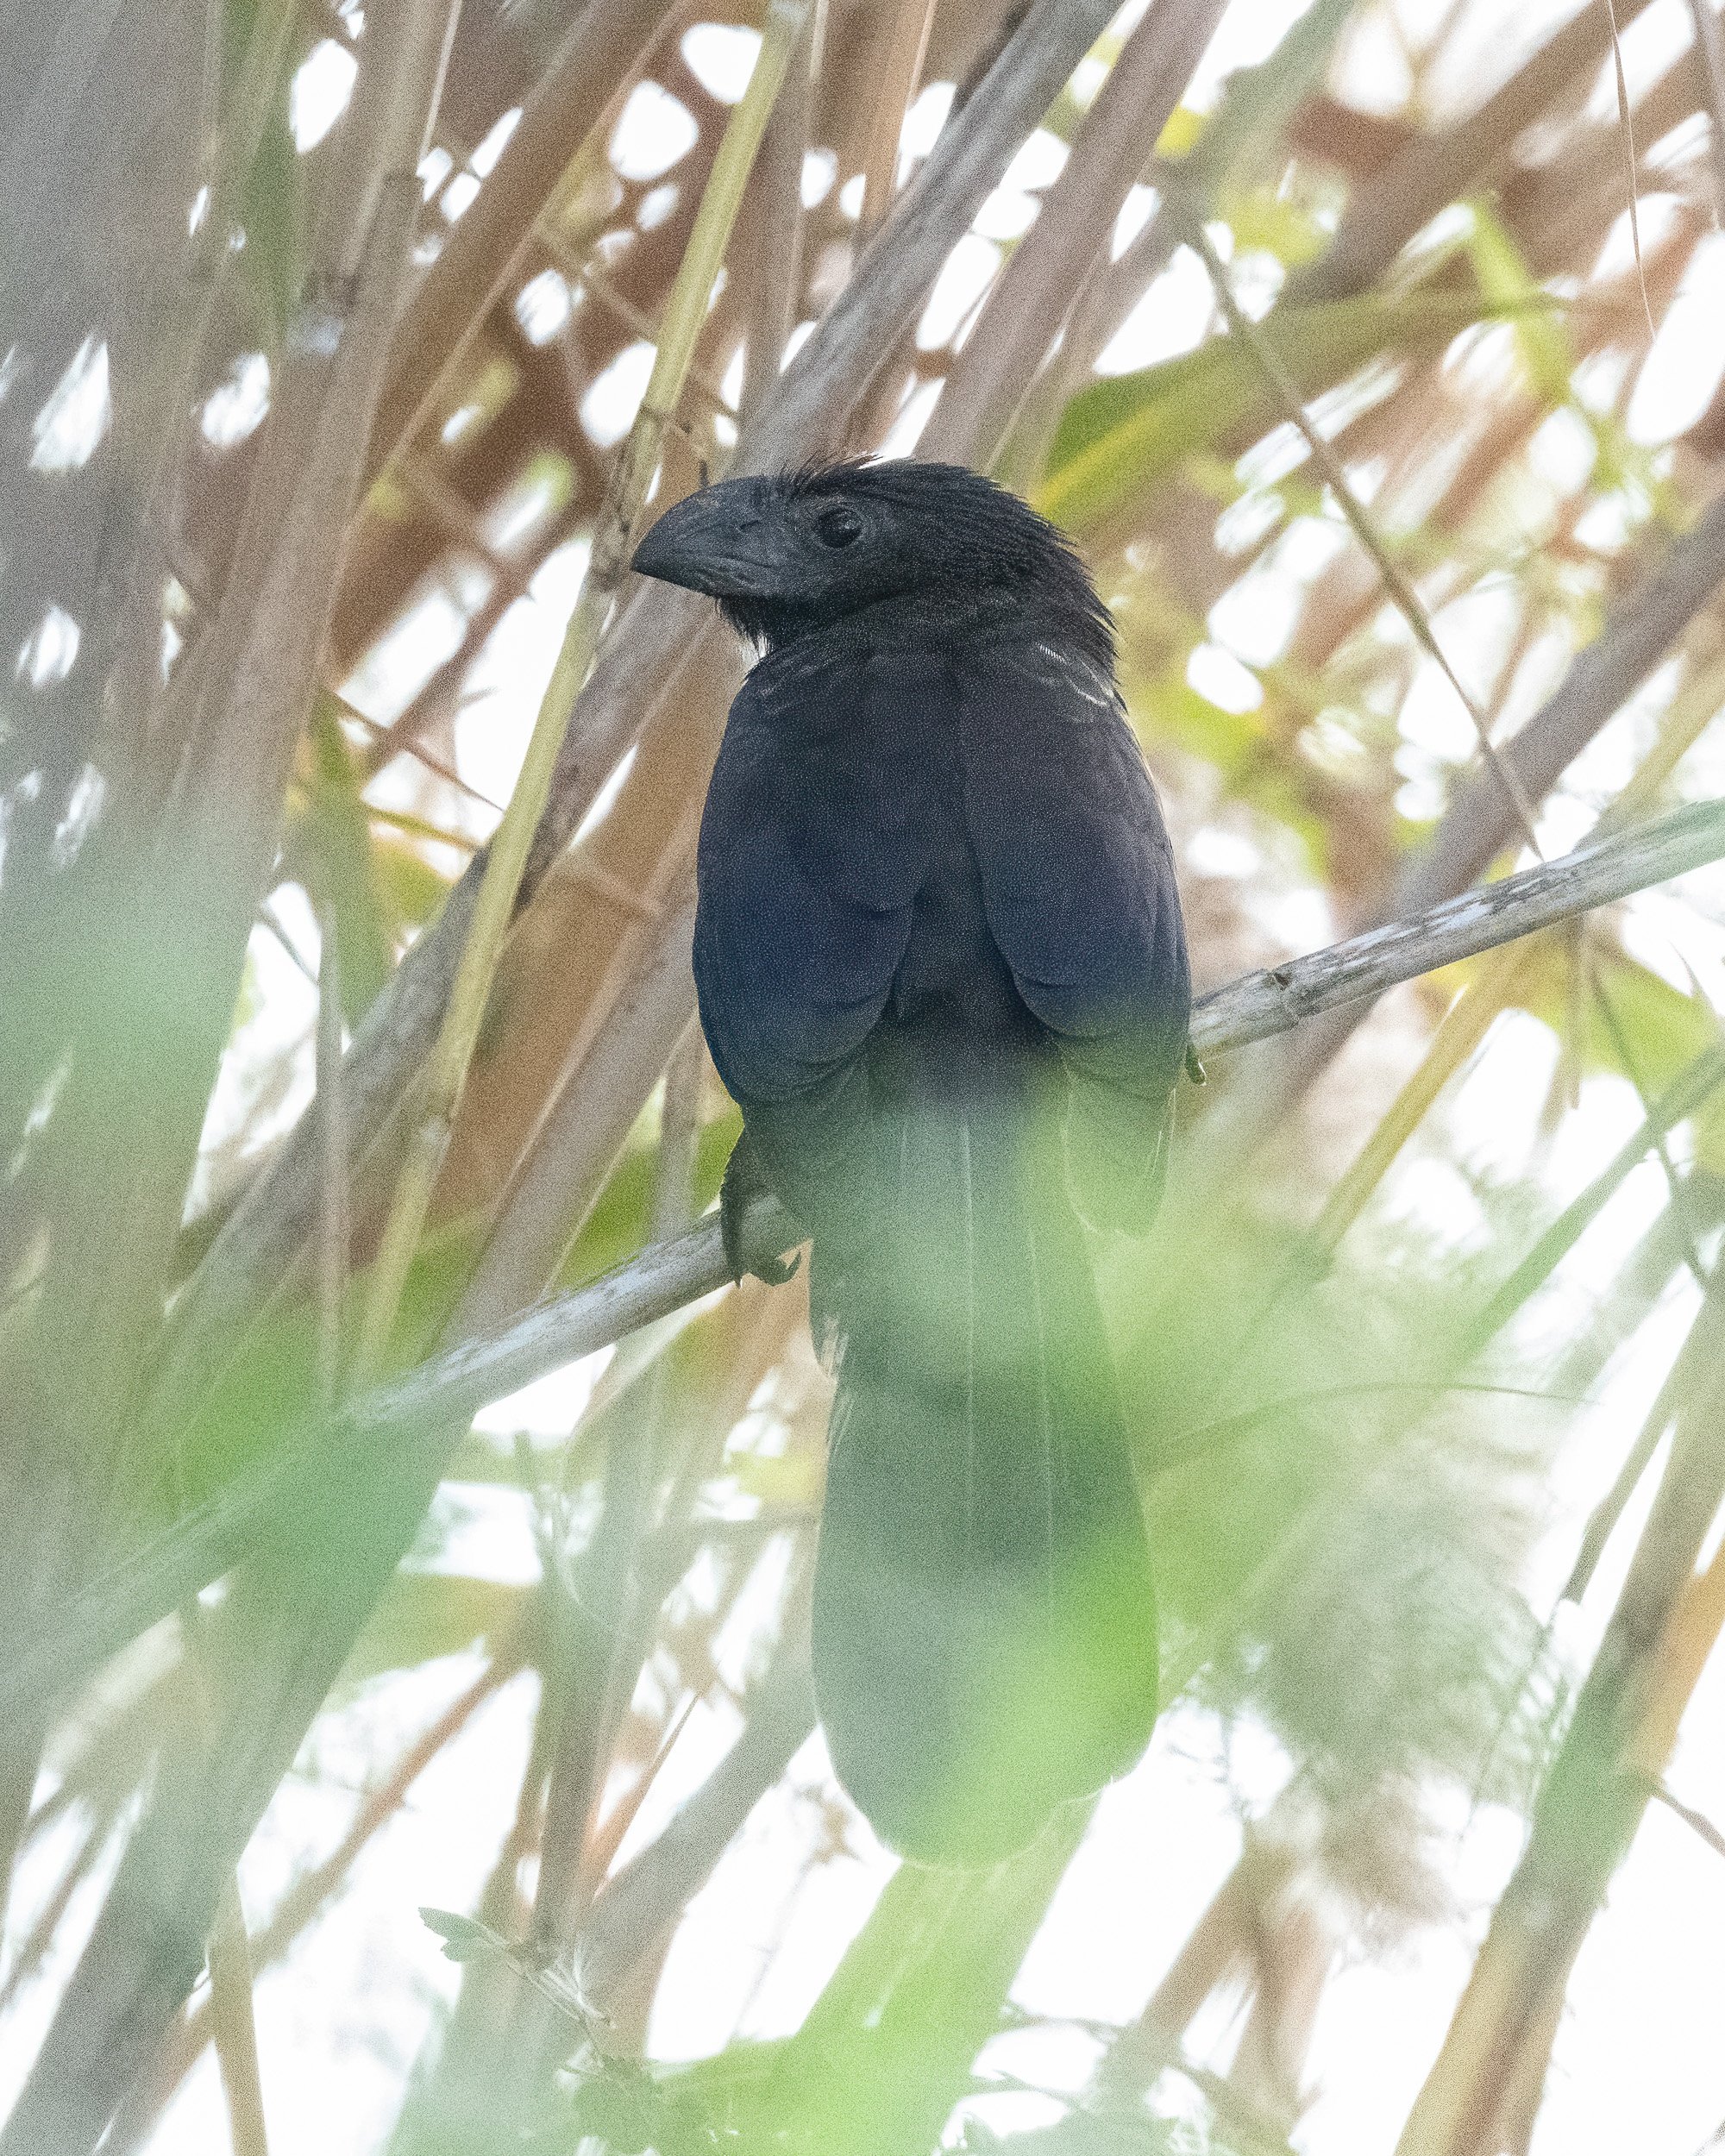  A very skulky groove-billed ani at the National Butterfly Center (life bird) 